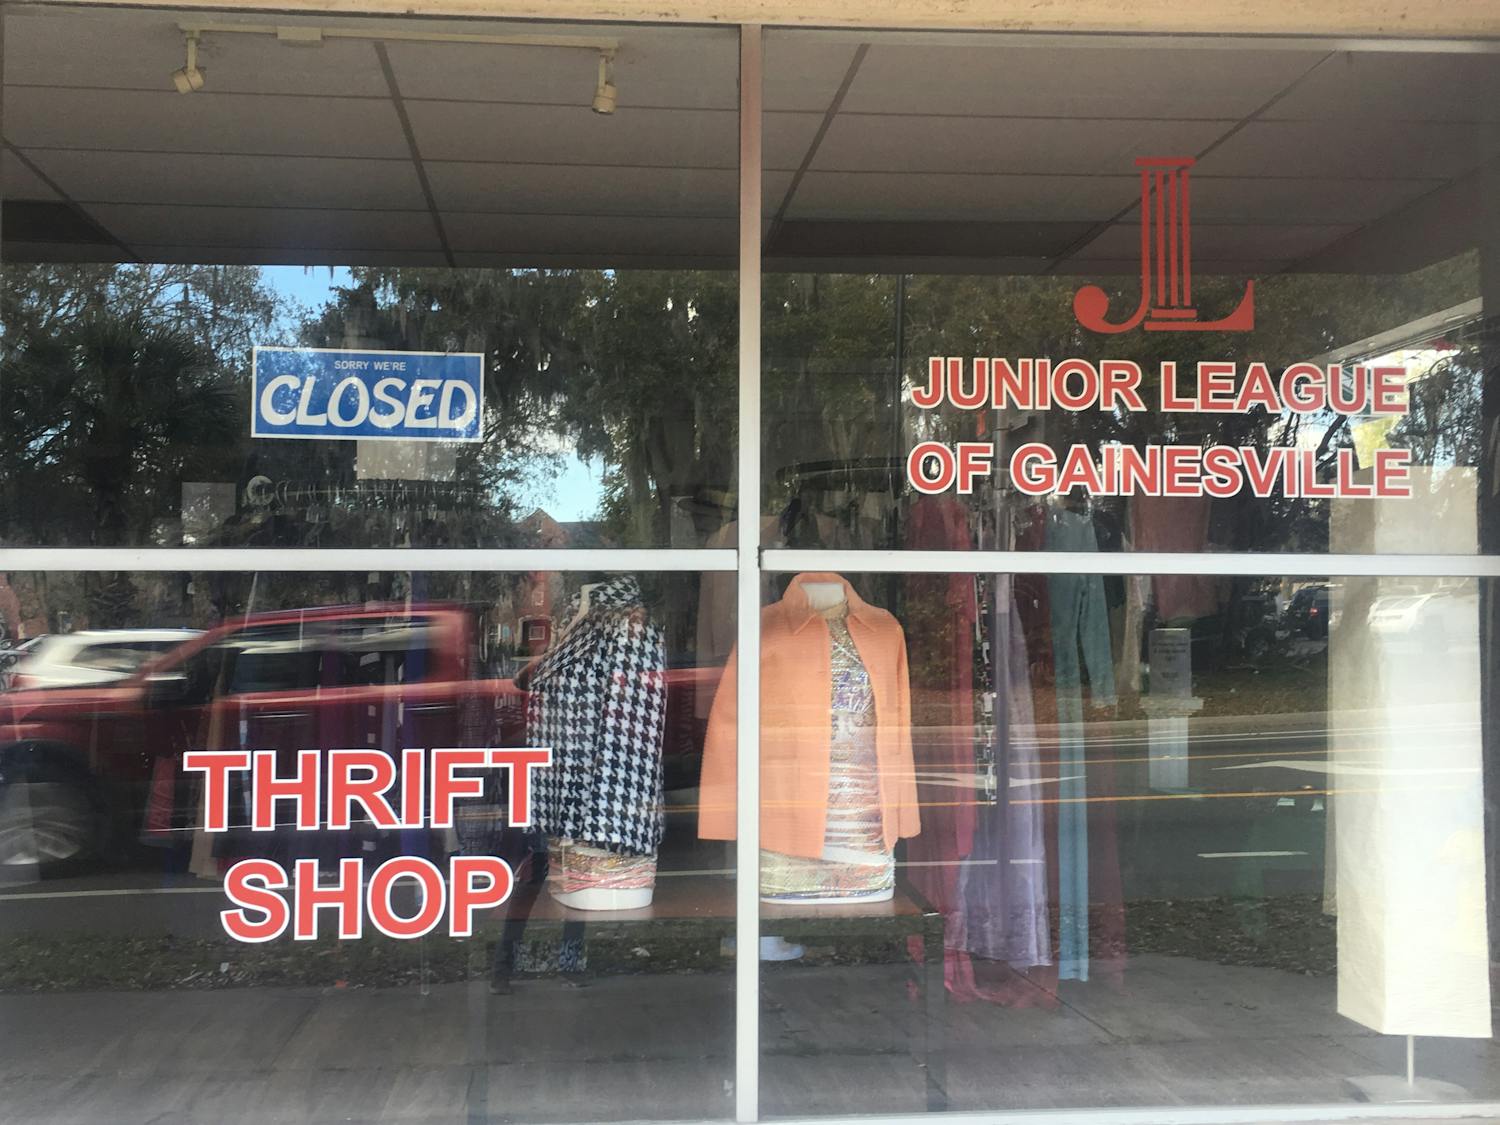 The Junior League of Gainesville Thrift Shop, located at 430 N. Main St.